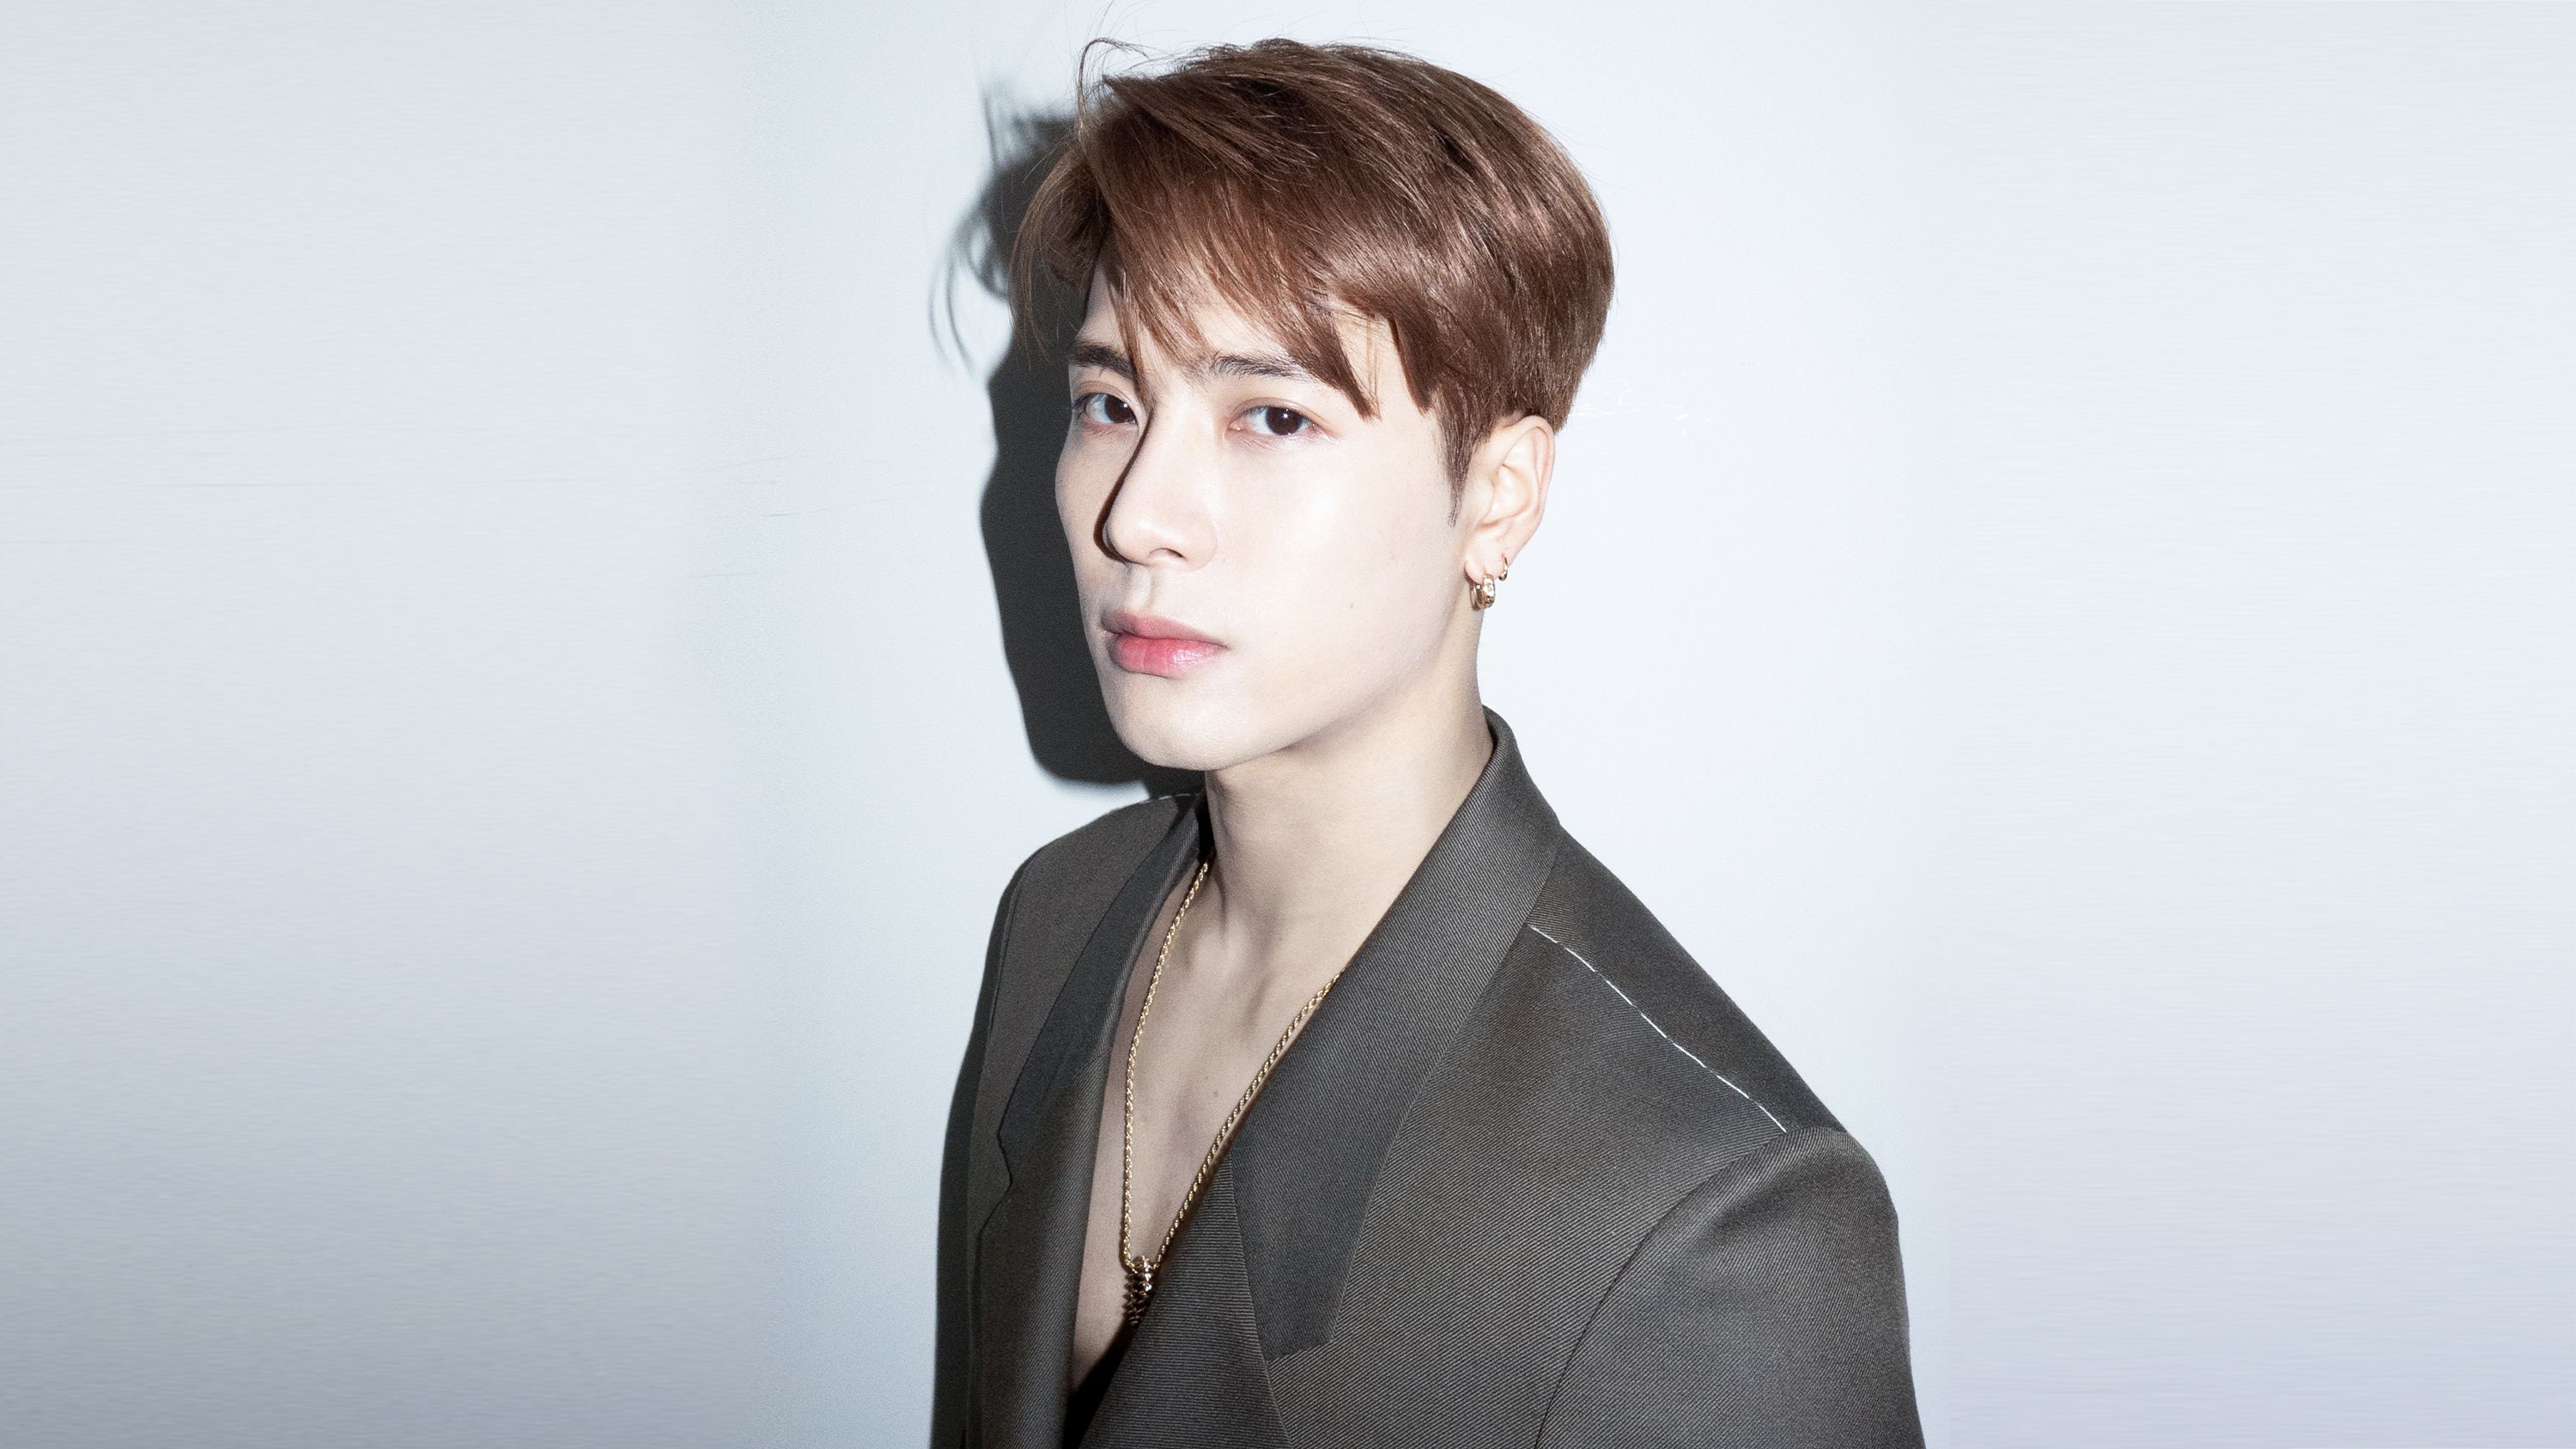 GOT7's Jackson Wang Shows More Concern For Others Than Himself At Airport,  Revealing His True Personality - Koreaboo